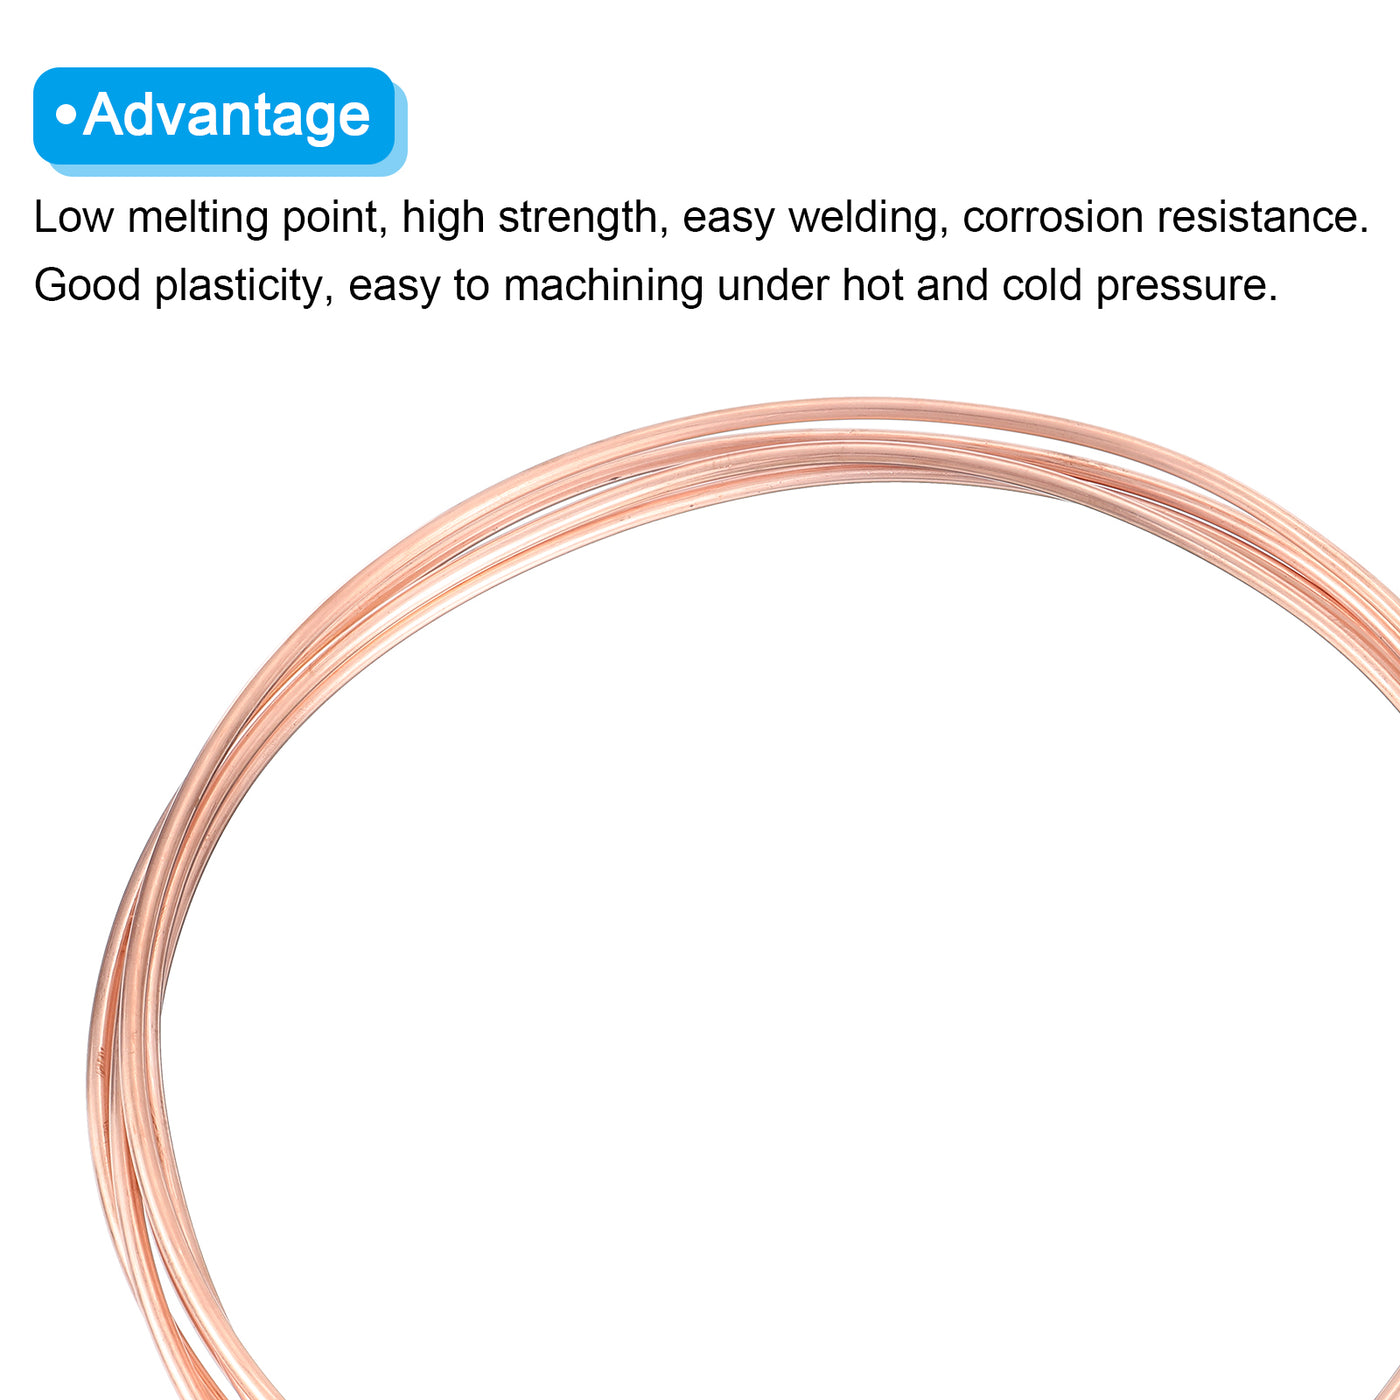 Harfington Copper Tube Refrigeration Tubing 0.2" OD x 0.16" ID x 29.5Ft Seamless Round Pipe Coil for Refrigerator, Freezer, Air Conditioner